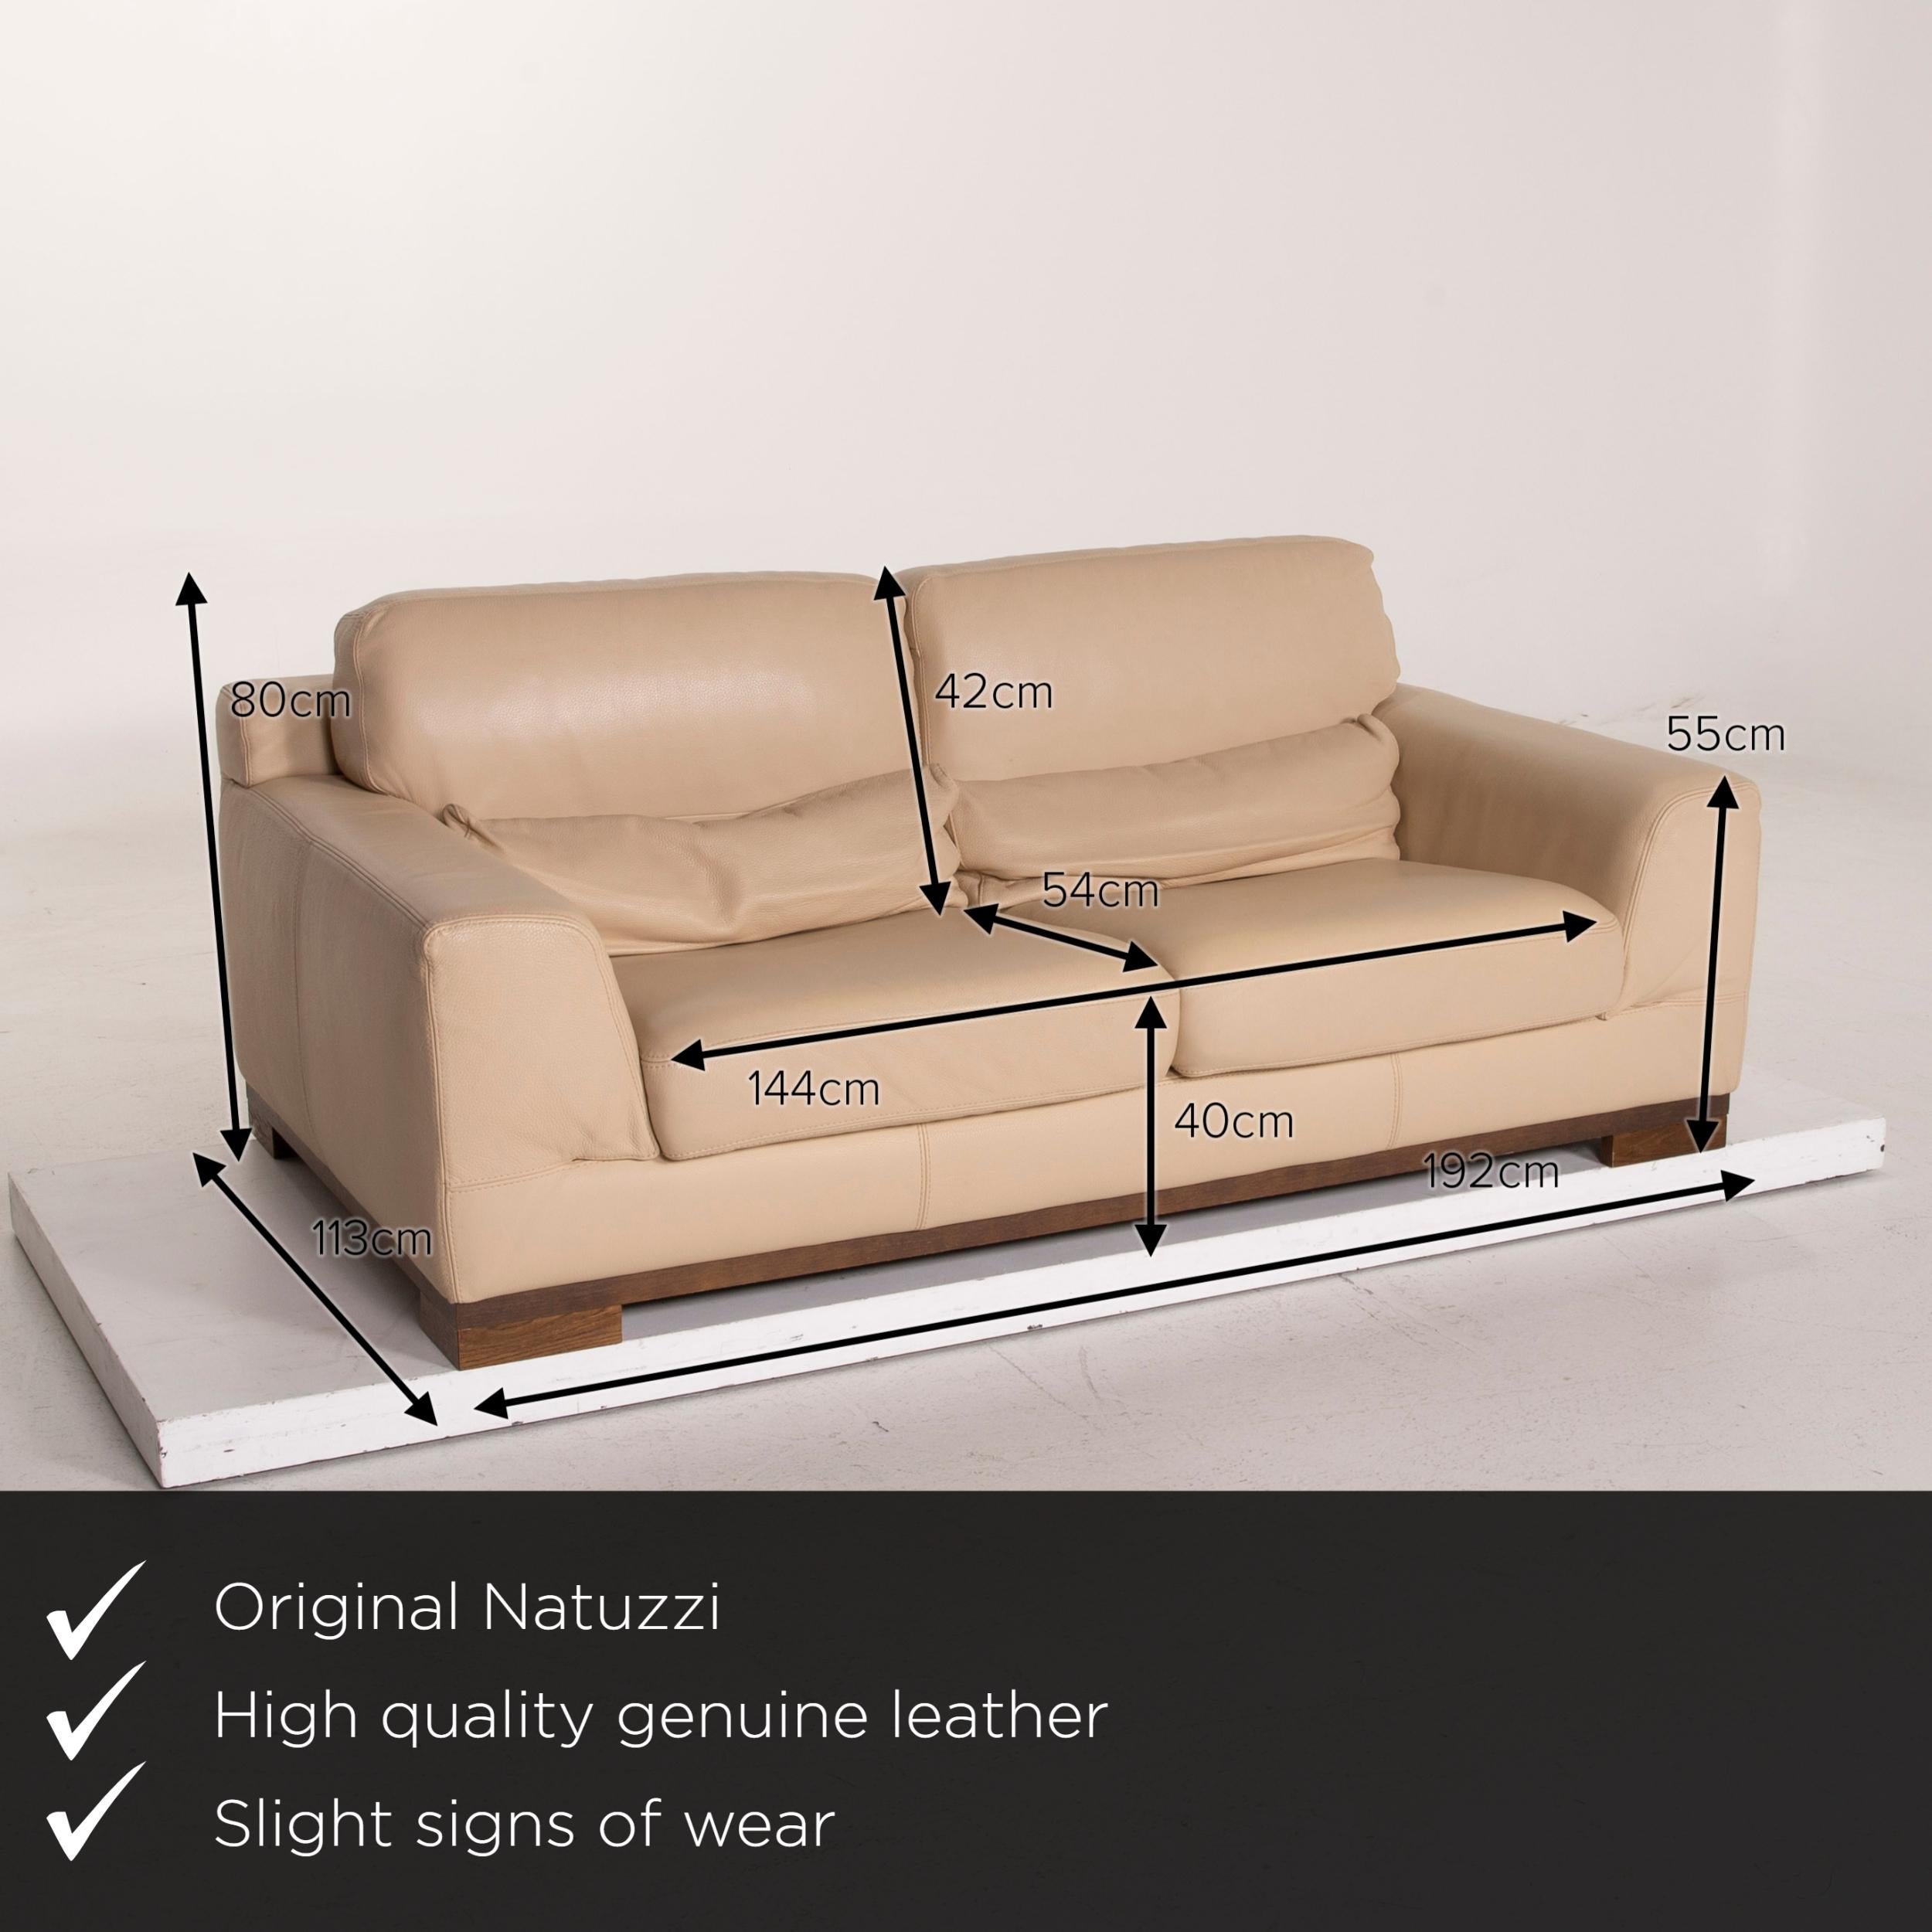 We present to you a Natuzzi 2085 leather sofa beige two-seat.


 Product measurements in centimeters:
 

Depth 113
Width 192
Height 80
Seat height 40
Rest height 55
Seat depth 54
Seat width 144
Back height 42.
 